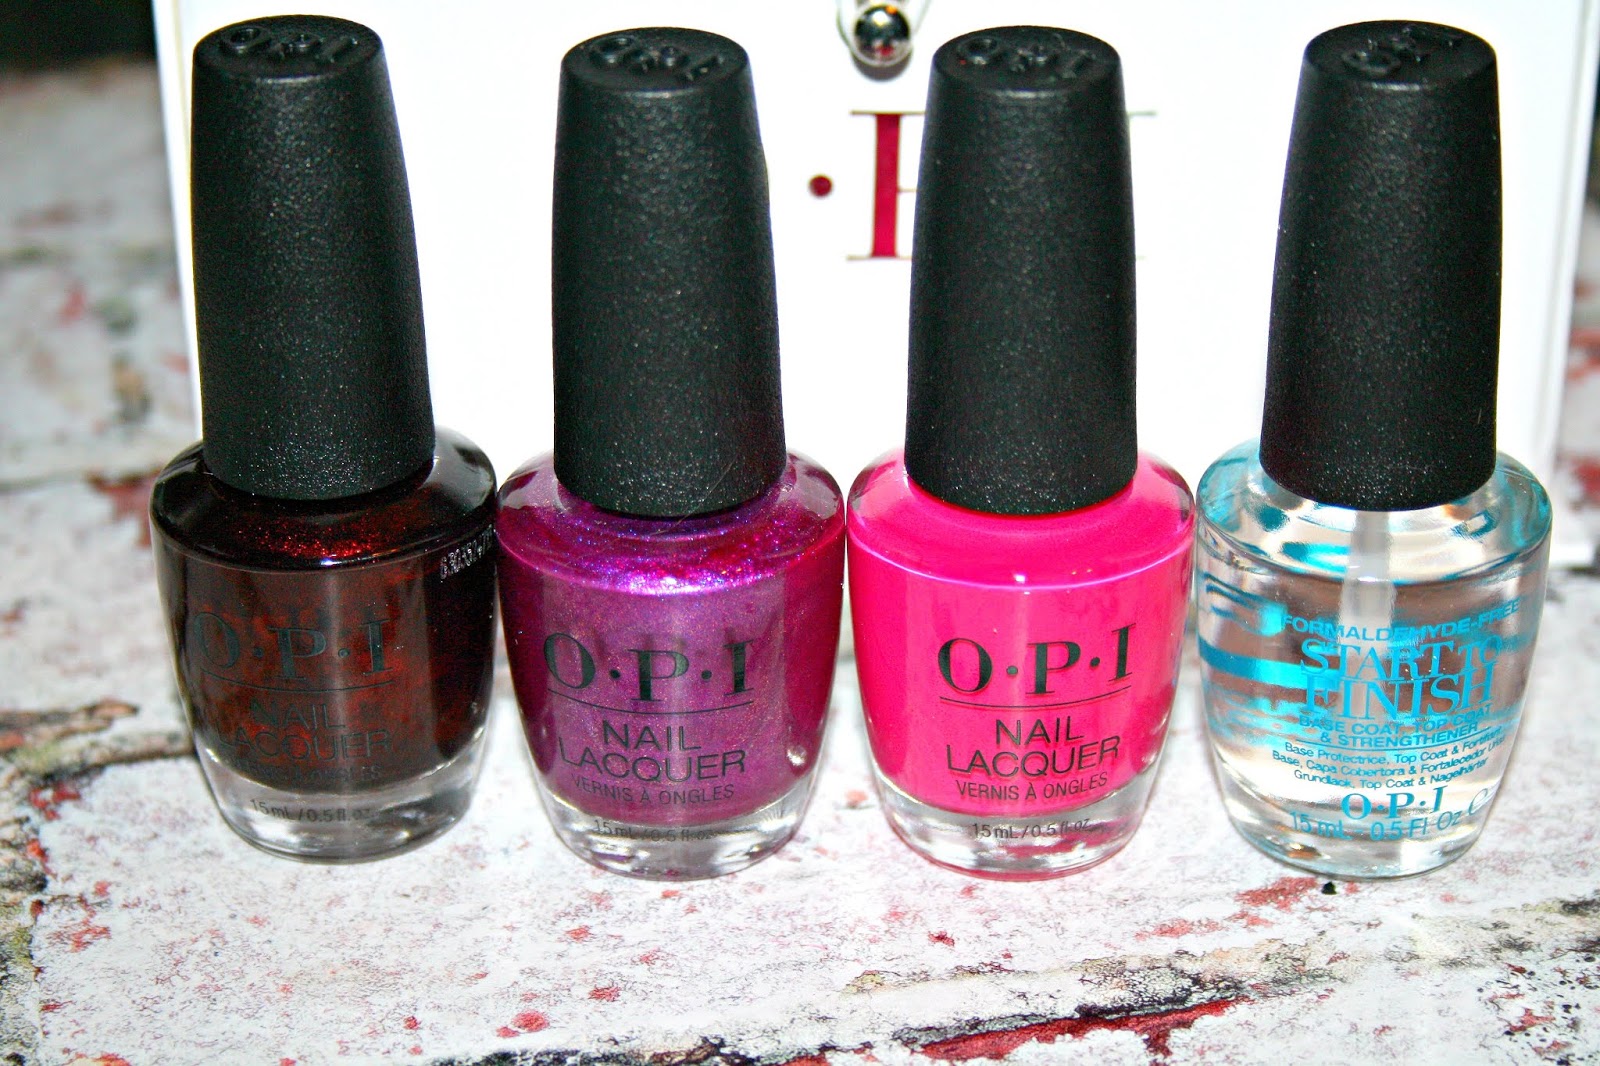 8. Disney-themed nail polish collection at OPI in Times Square - wide 4